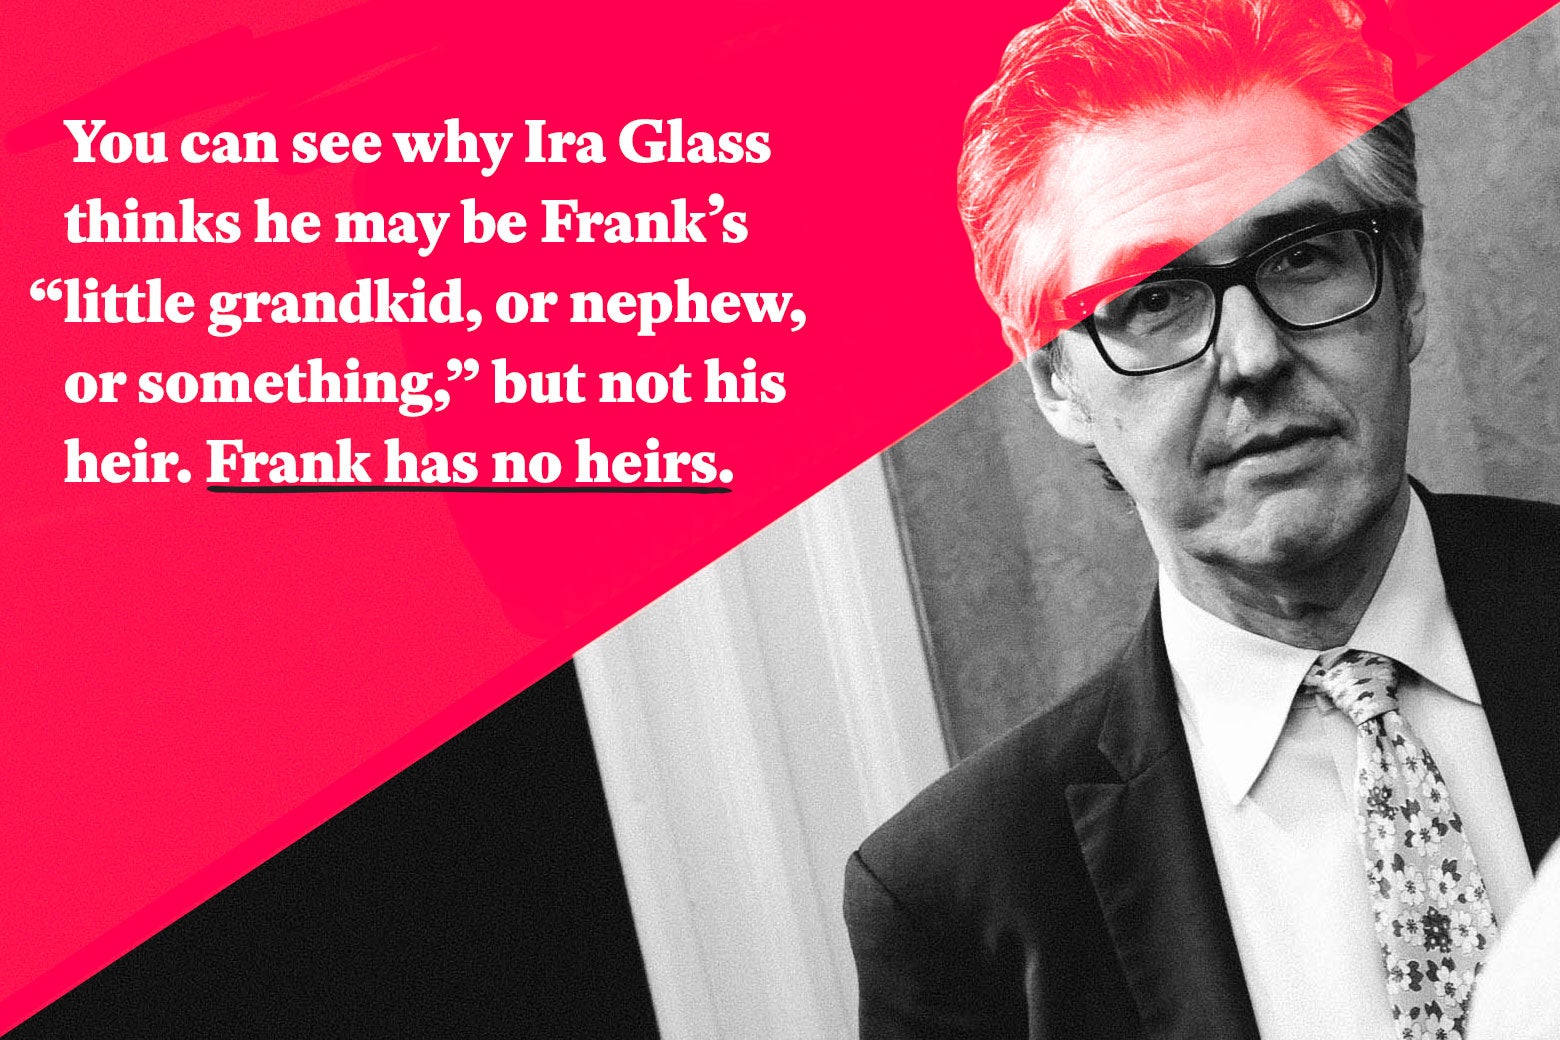 You can see why Ira Glass thinks he may be Frank’s “little grandkid, or nephew, or something,” but not his heir. Frank has no heirs. 